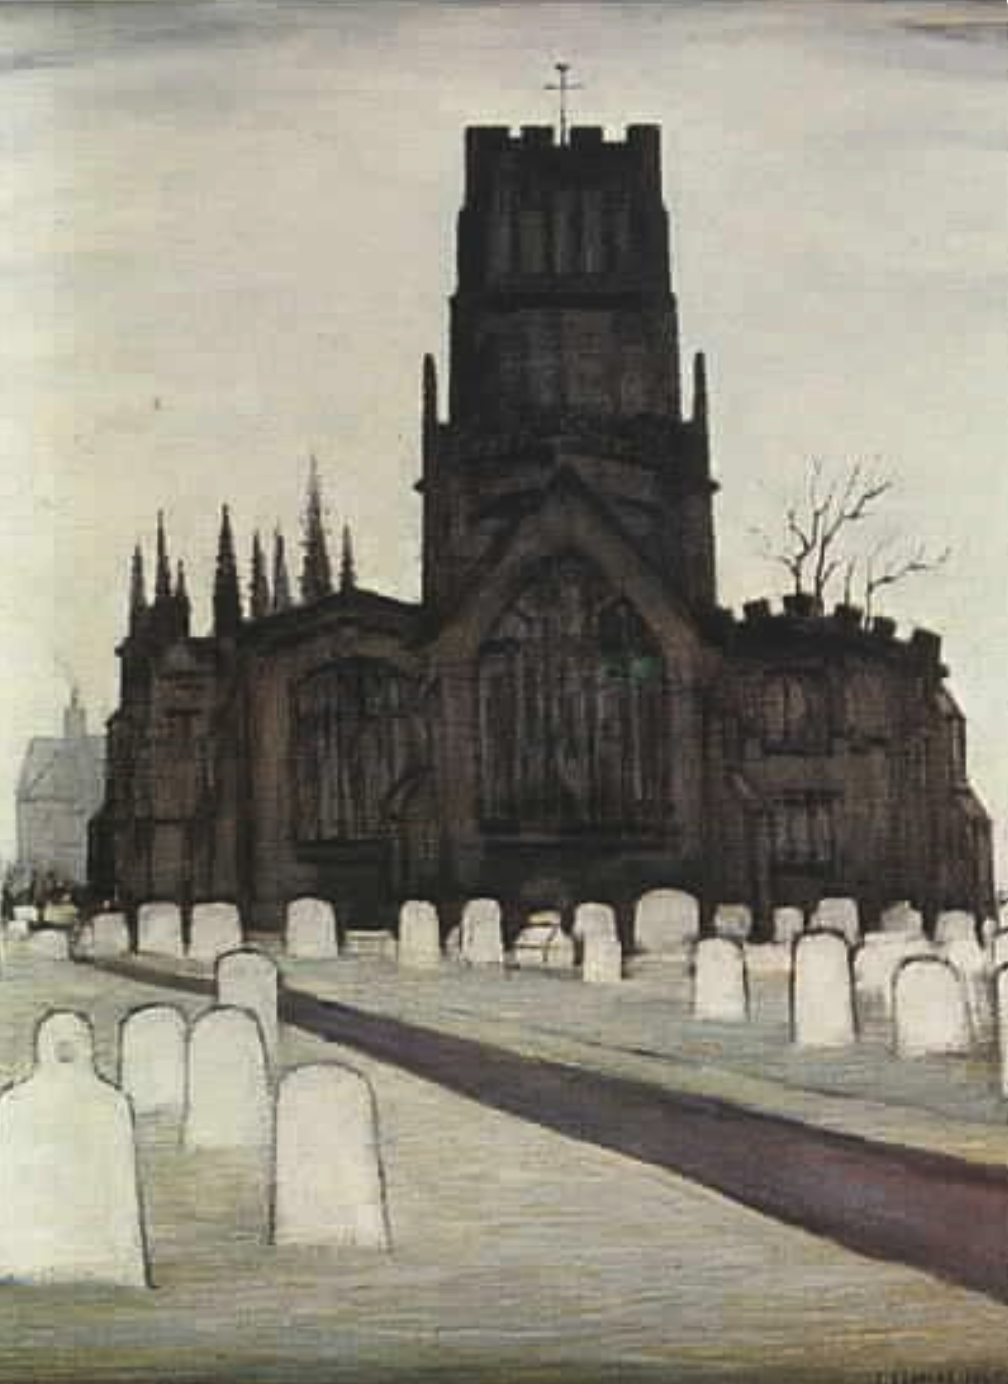 Northleach Church (1947) by Laurence Stephen Lowry (1887 - 1976), English artist.